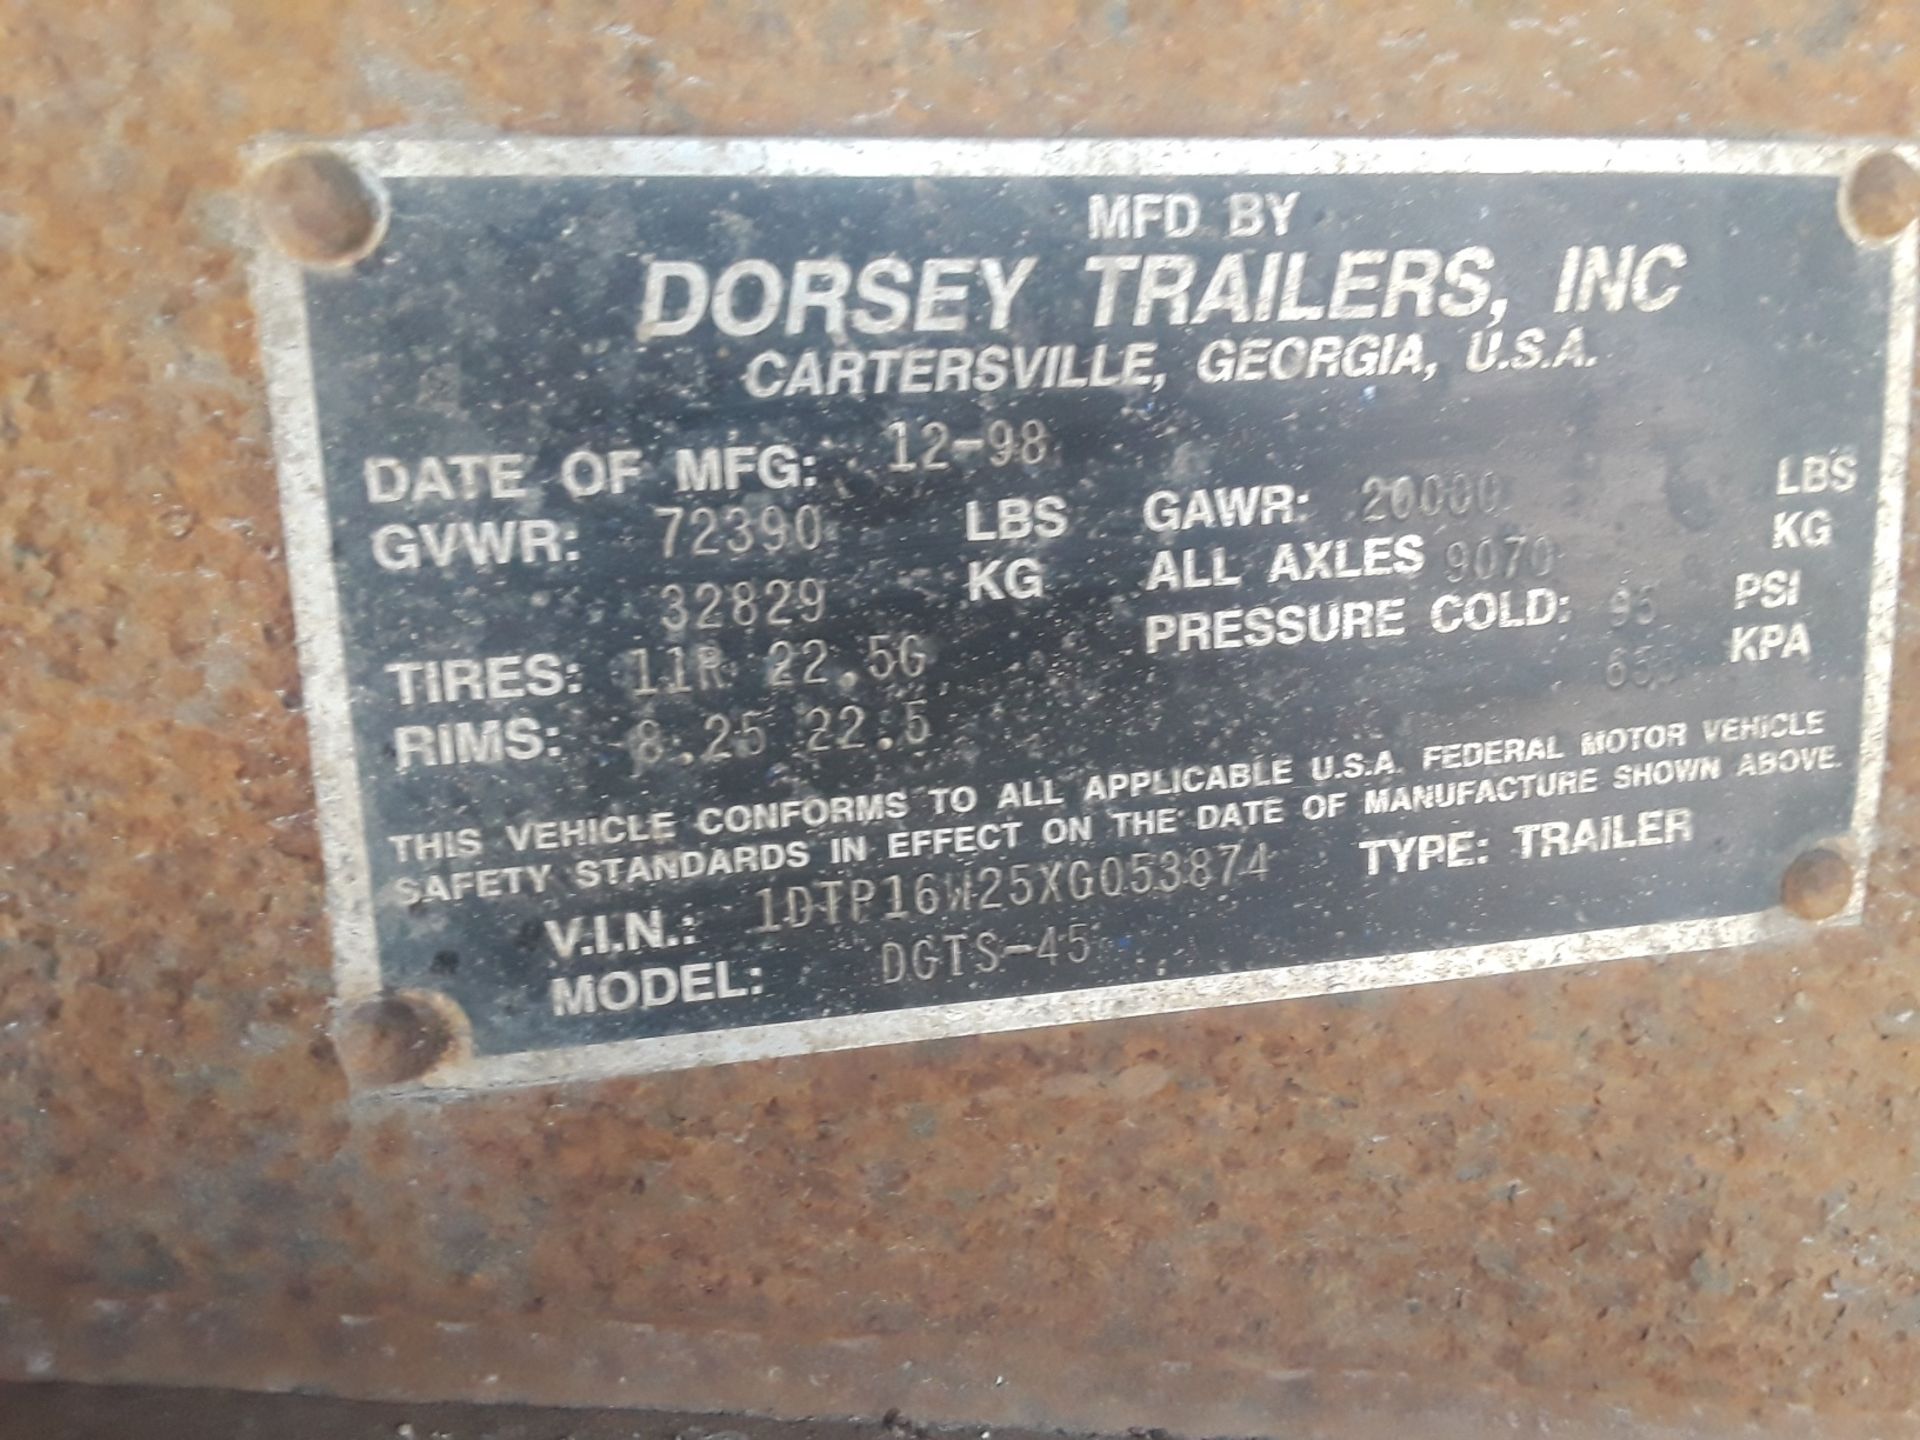 45' Dorsey Flatbed Trailer, VIN: 1DTP16W25XG063884 (Subject To Confirmation) - Image 2 of 2